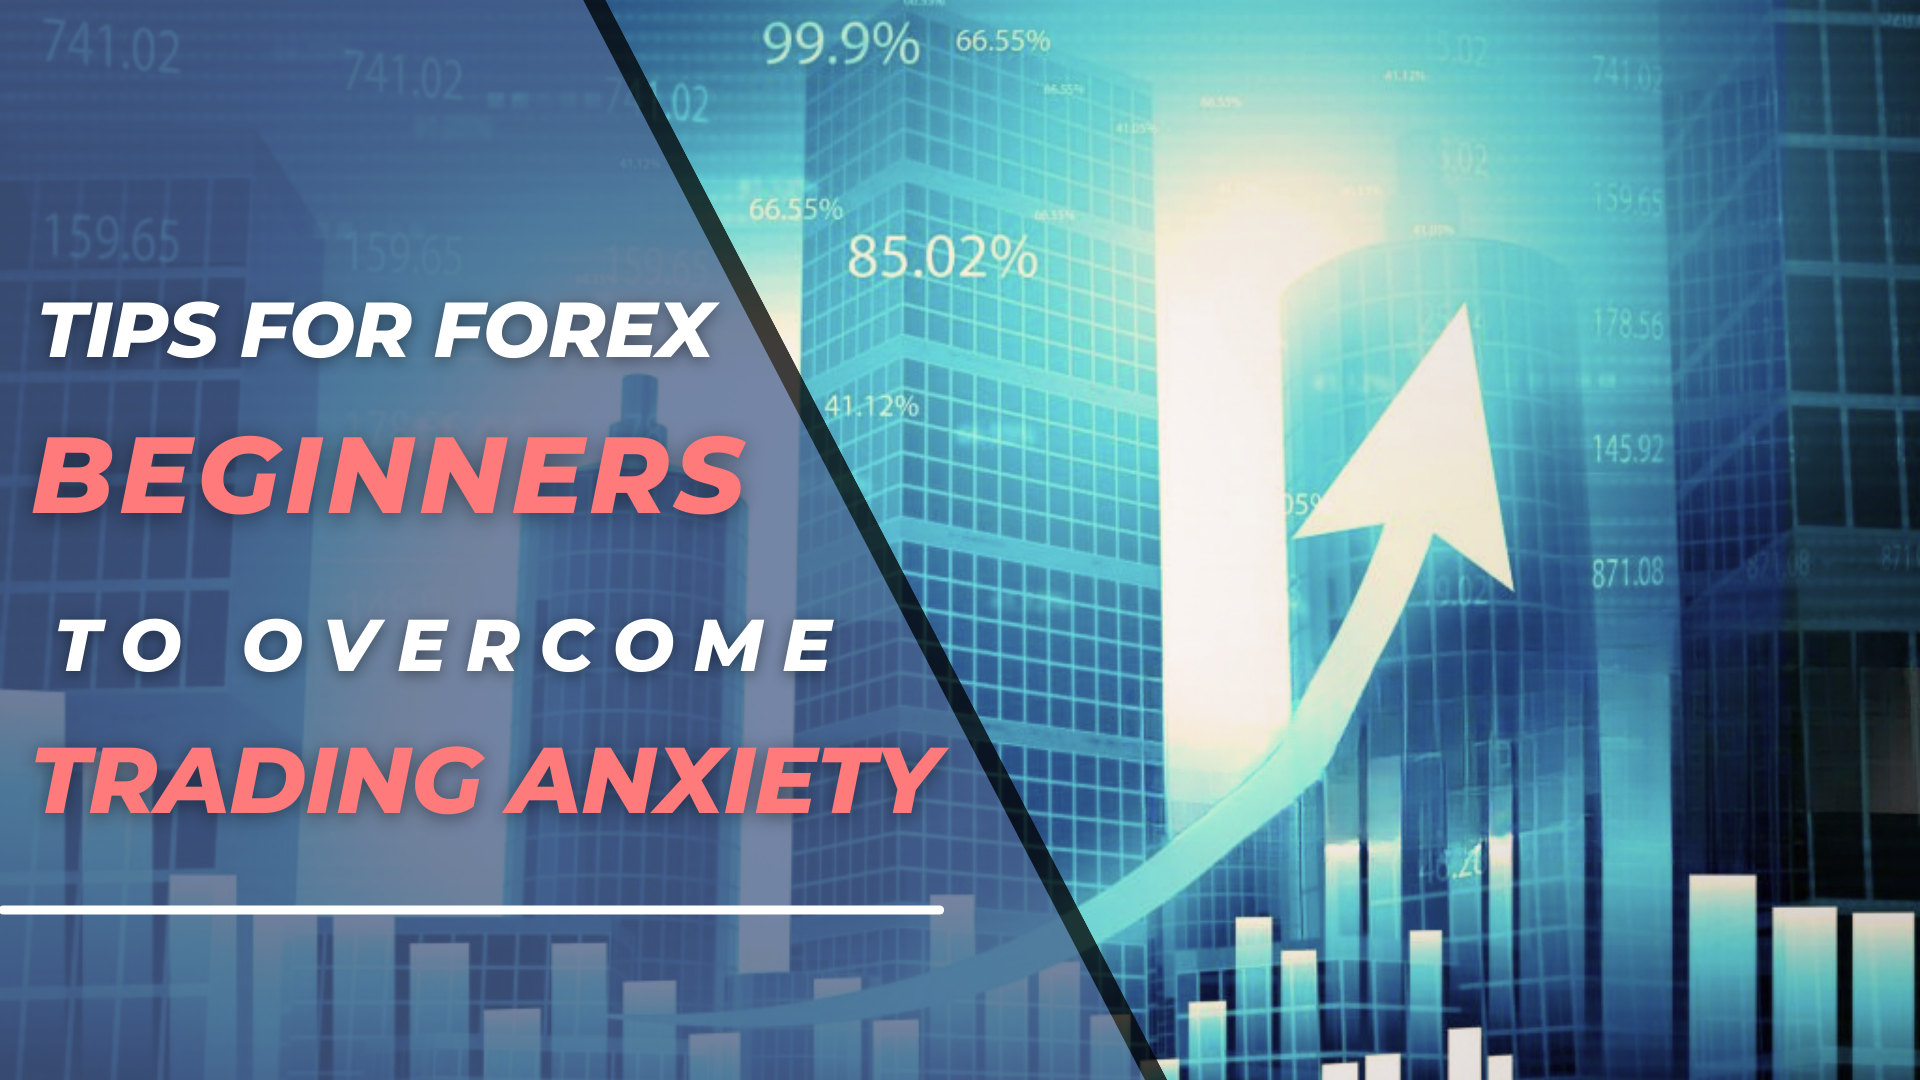 5 Tips For Forex Beginners To Get Rid Of Their Trading Anxiety